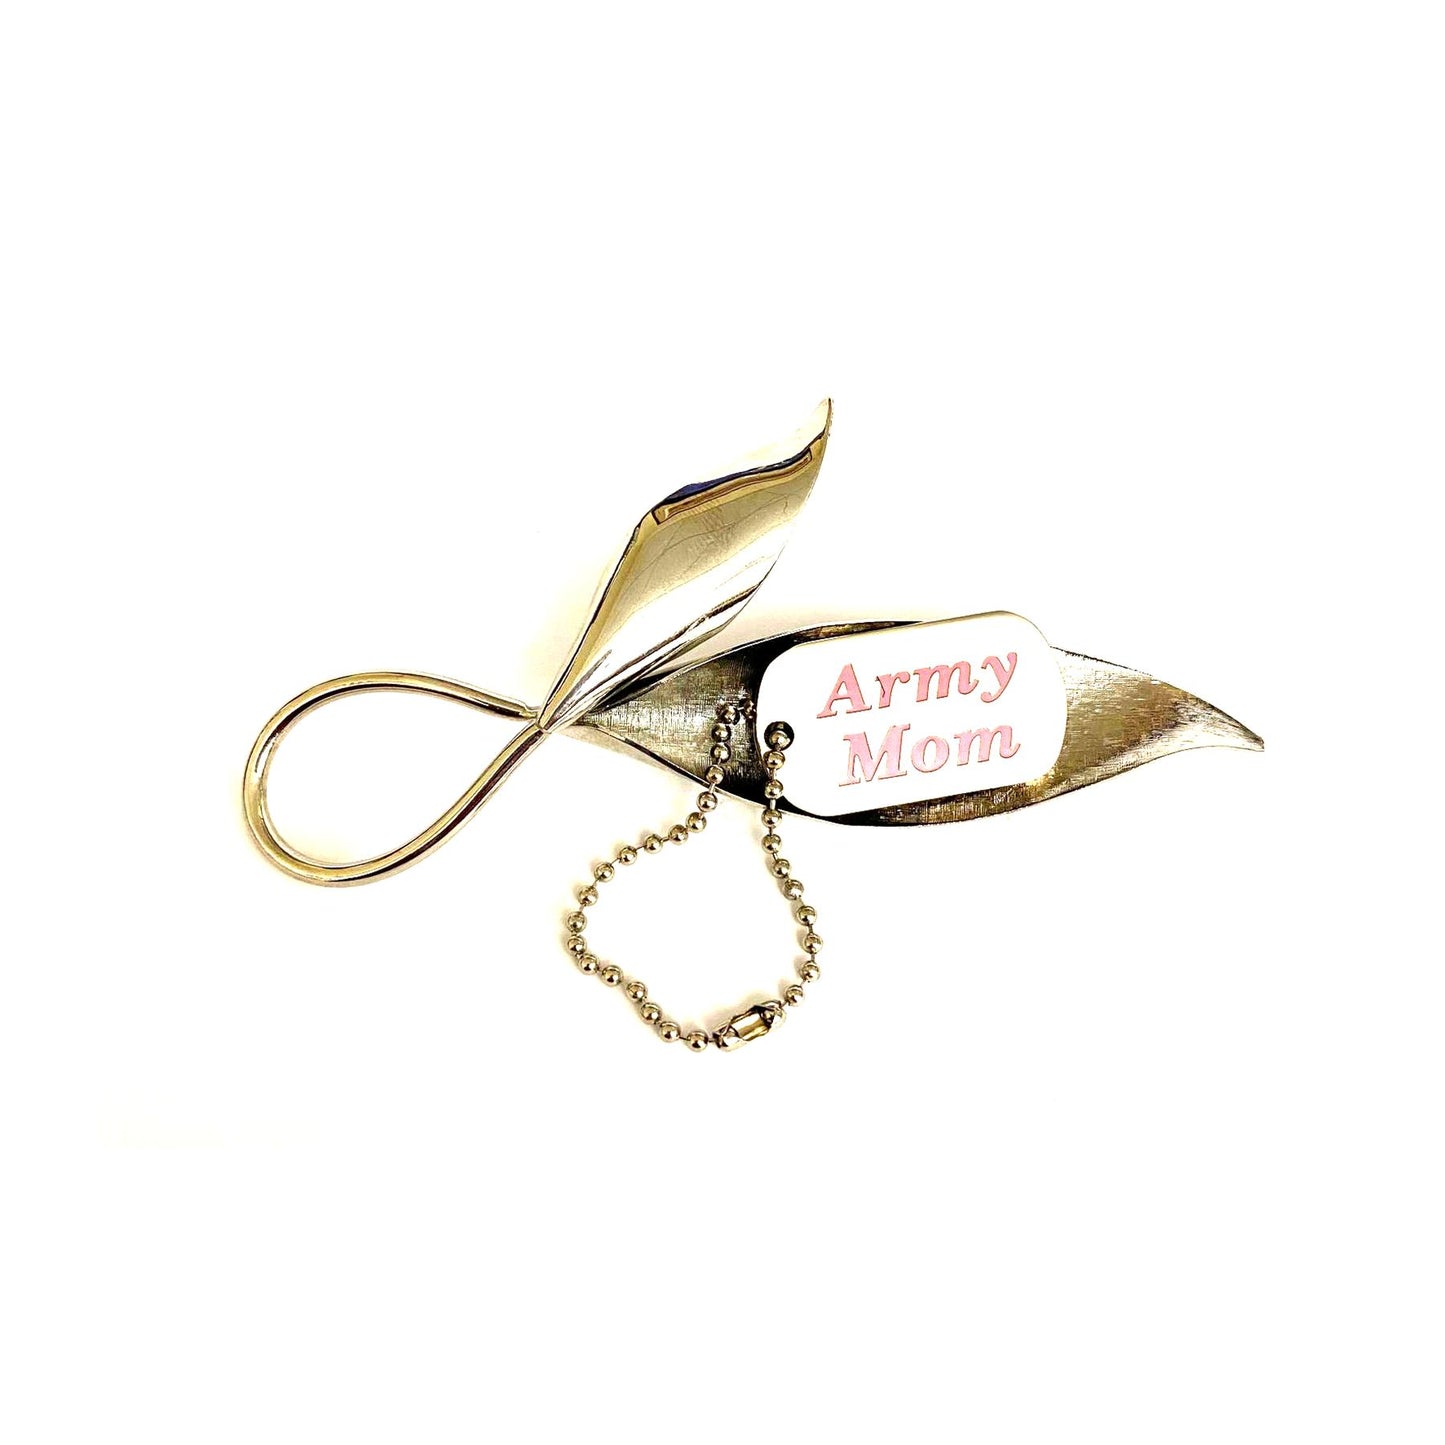 Brooches - Army Themes